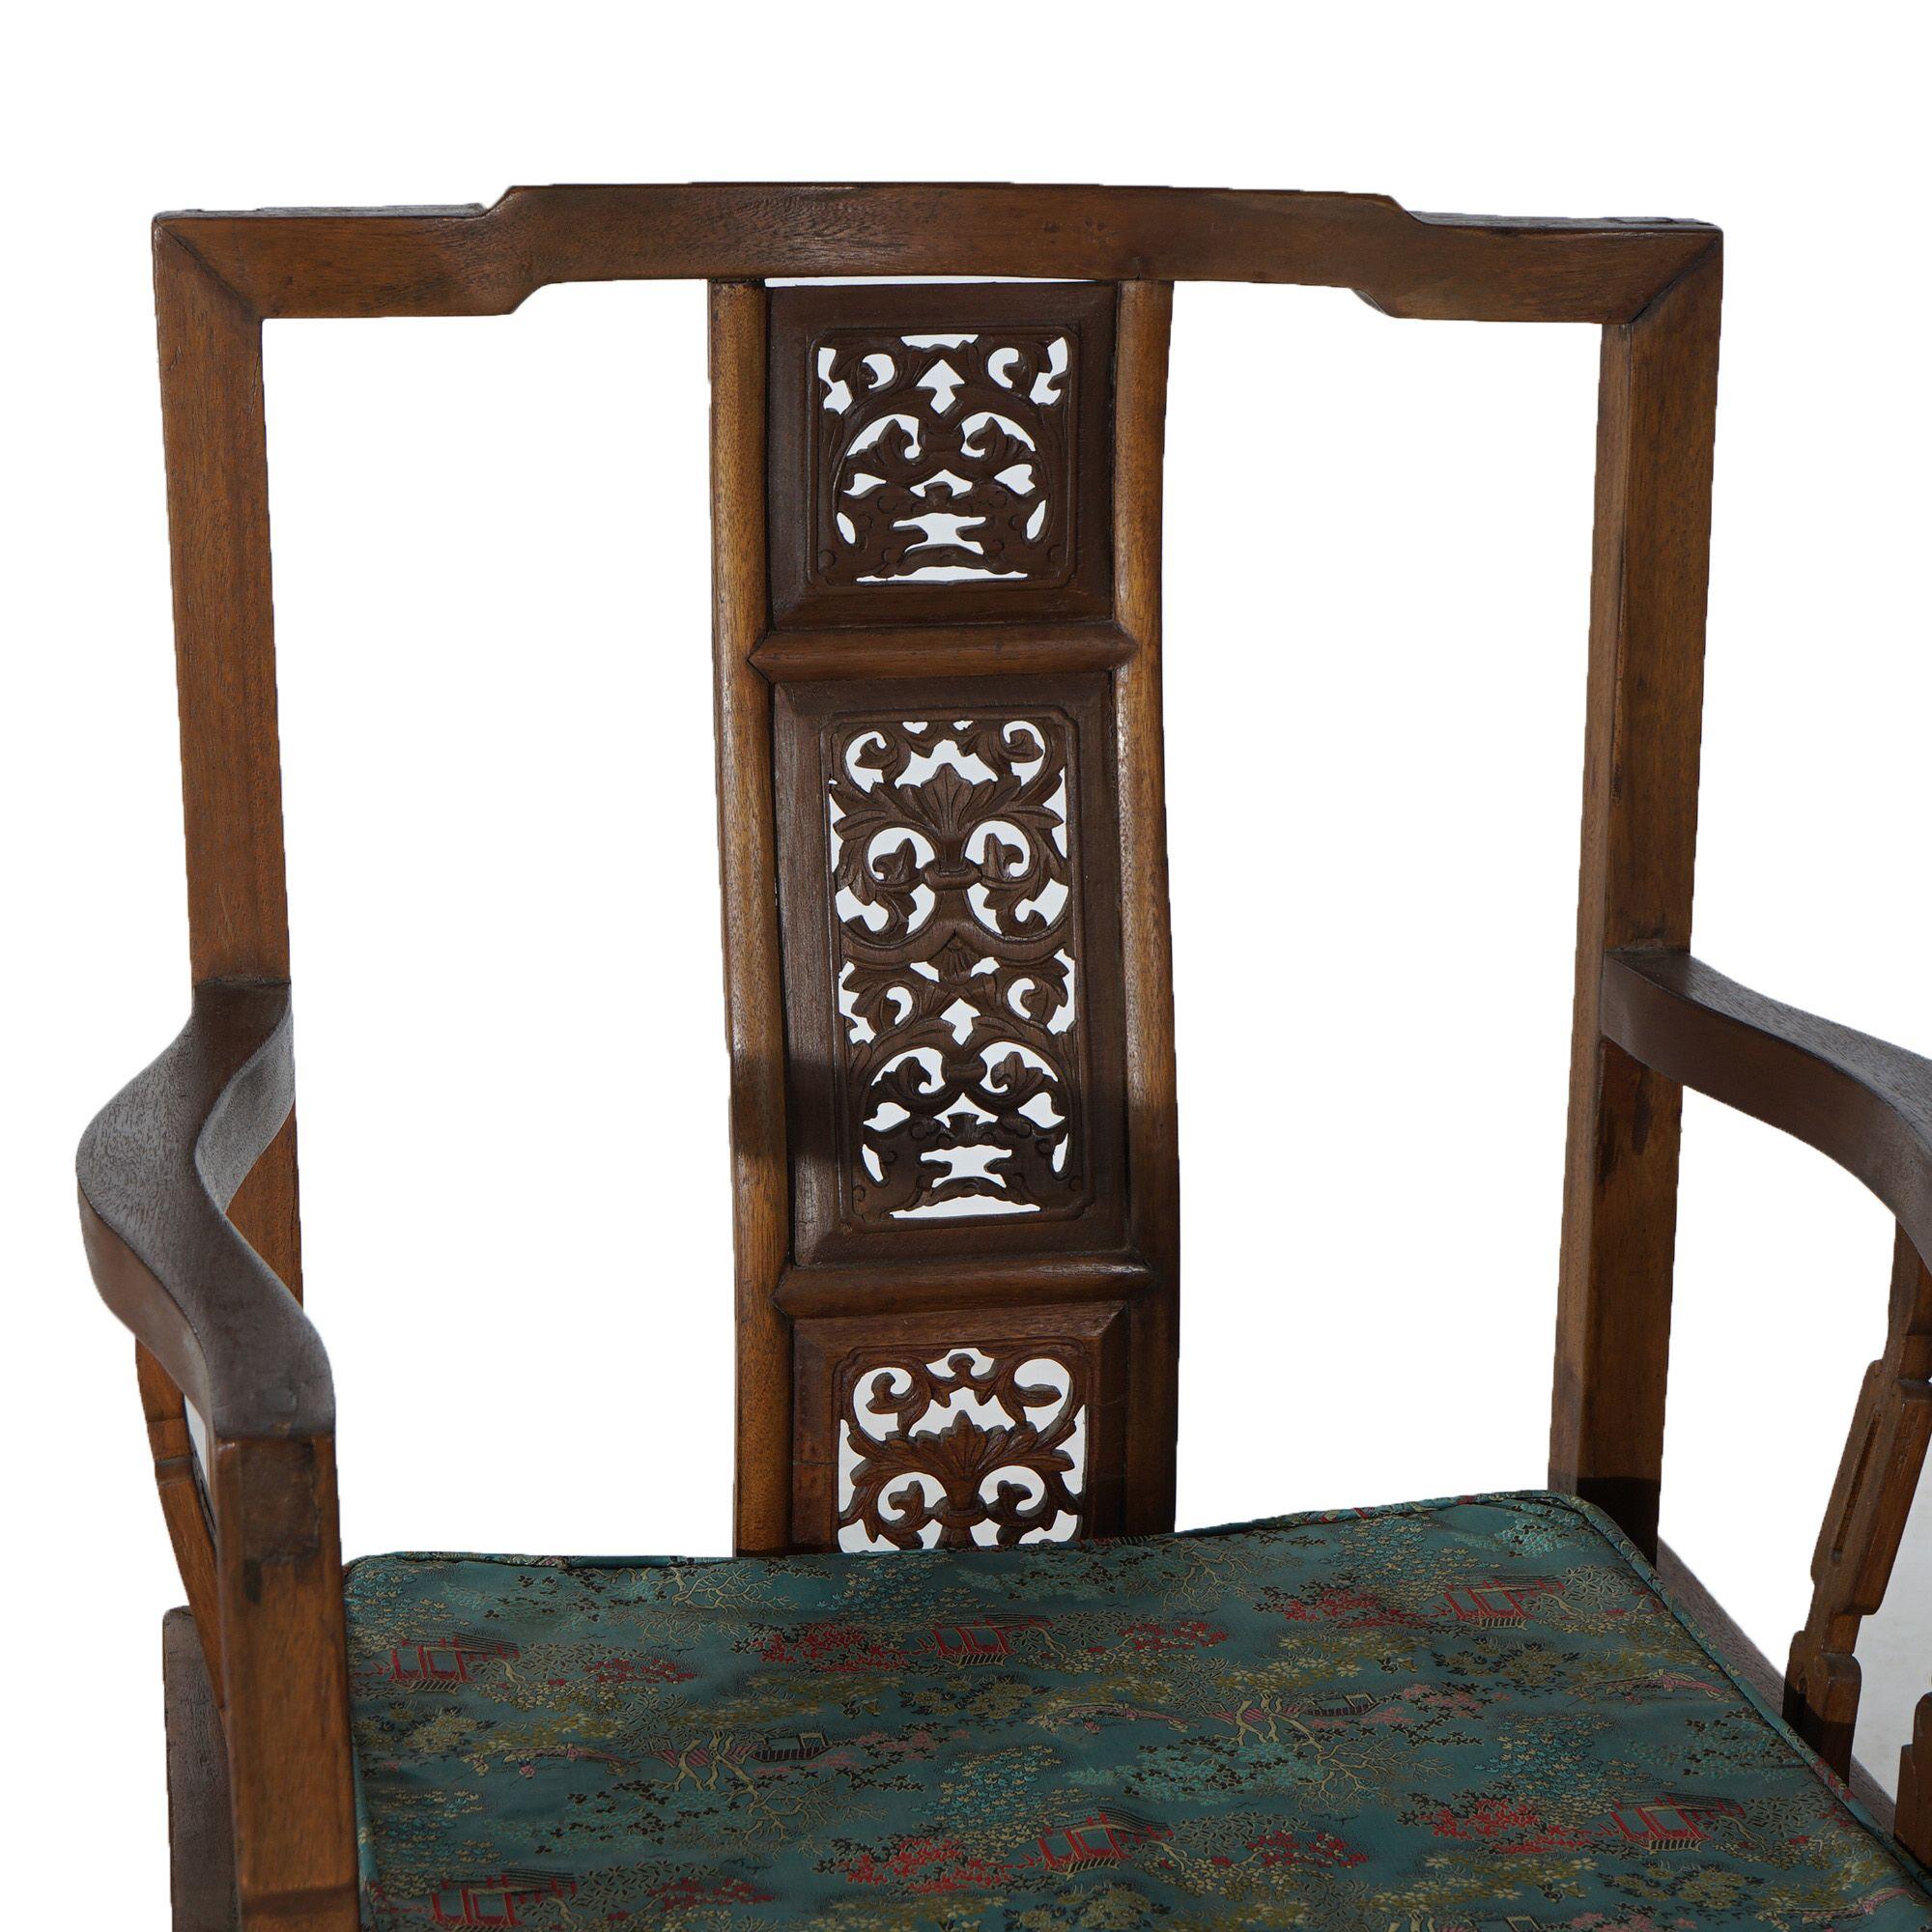 A pair of Chinese throne  arm chairs offer carved hardwood construction with pierced slat backs having foliate elements, silk upholstered cushions, and raised on straight and square legs terminating in stylized hoof feet, mid-20th century

Measures